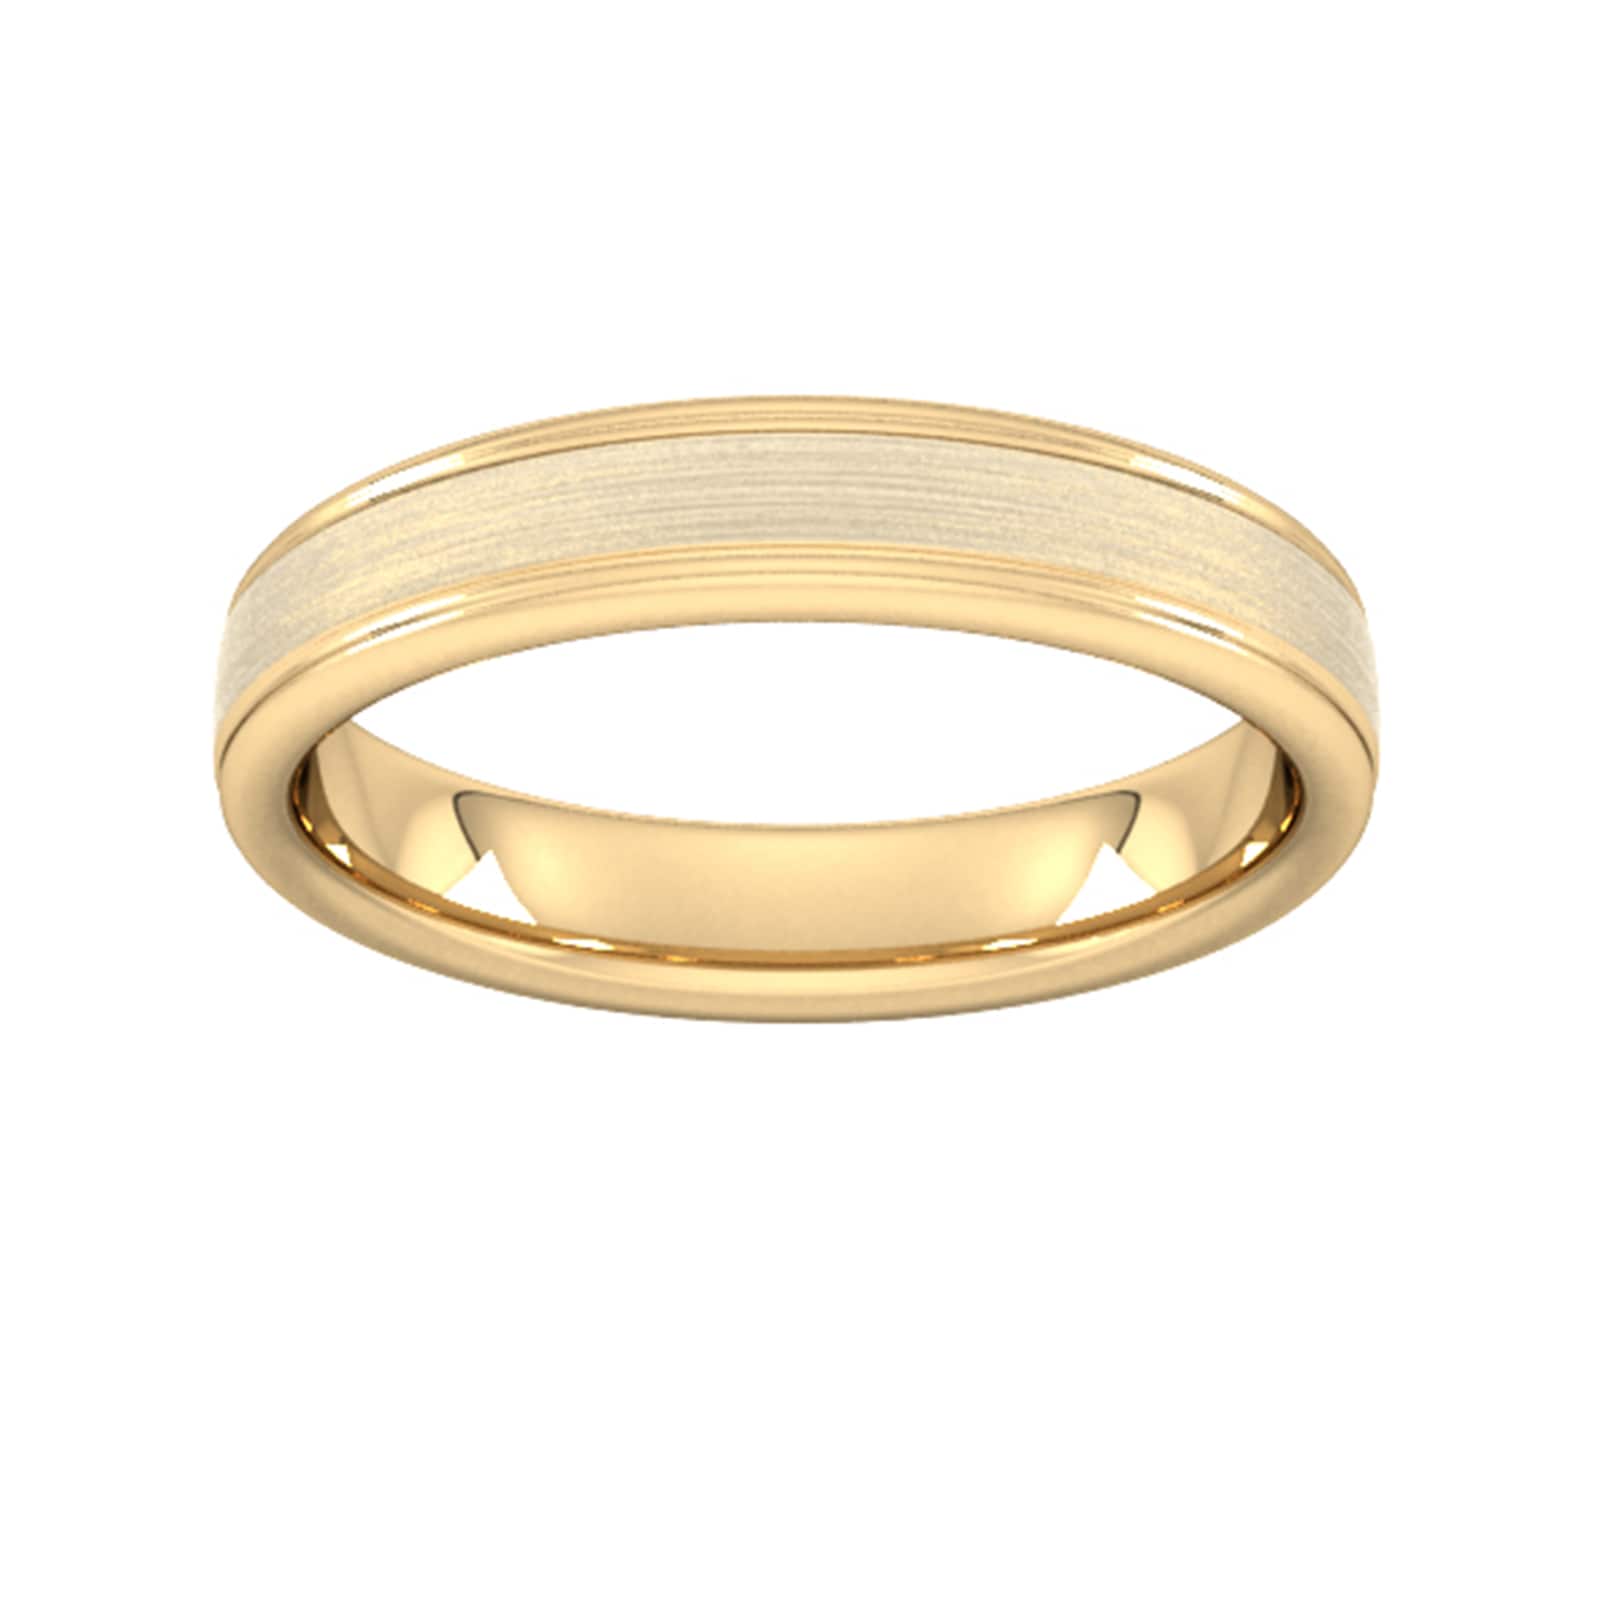 4mm Flat Court Heavy Matt Centre With Grooves Wedding Ring In 18 Carat Yellow Gold - Ring Size P